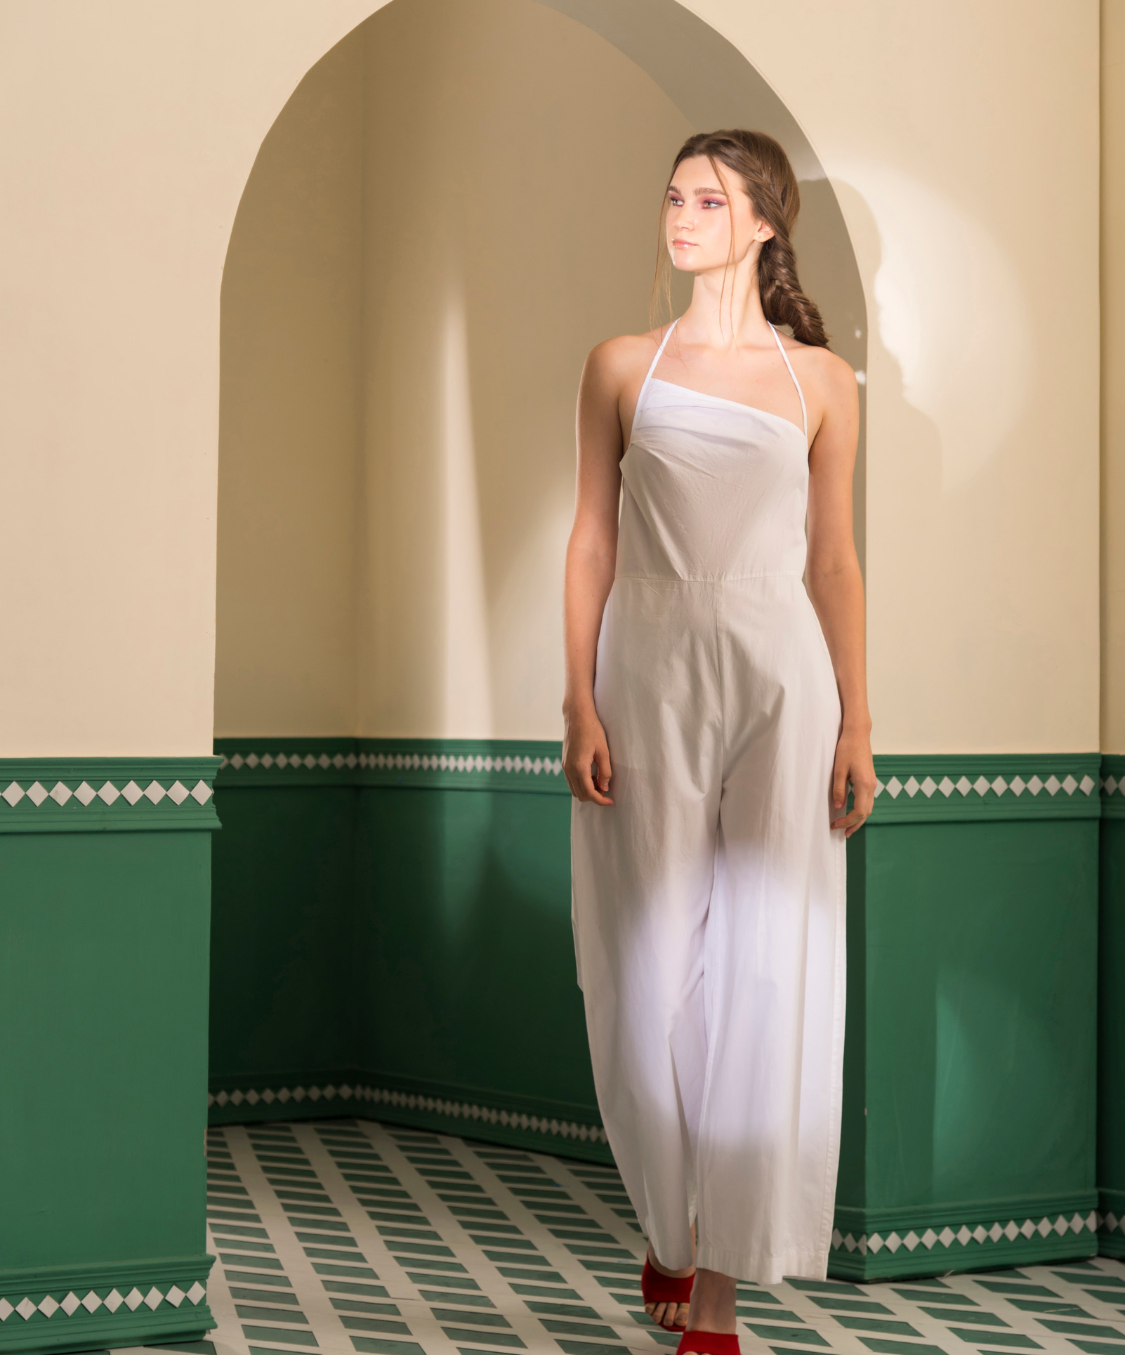 ABBI JUMPSUIT - WHITE, a product by Kelby Huston